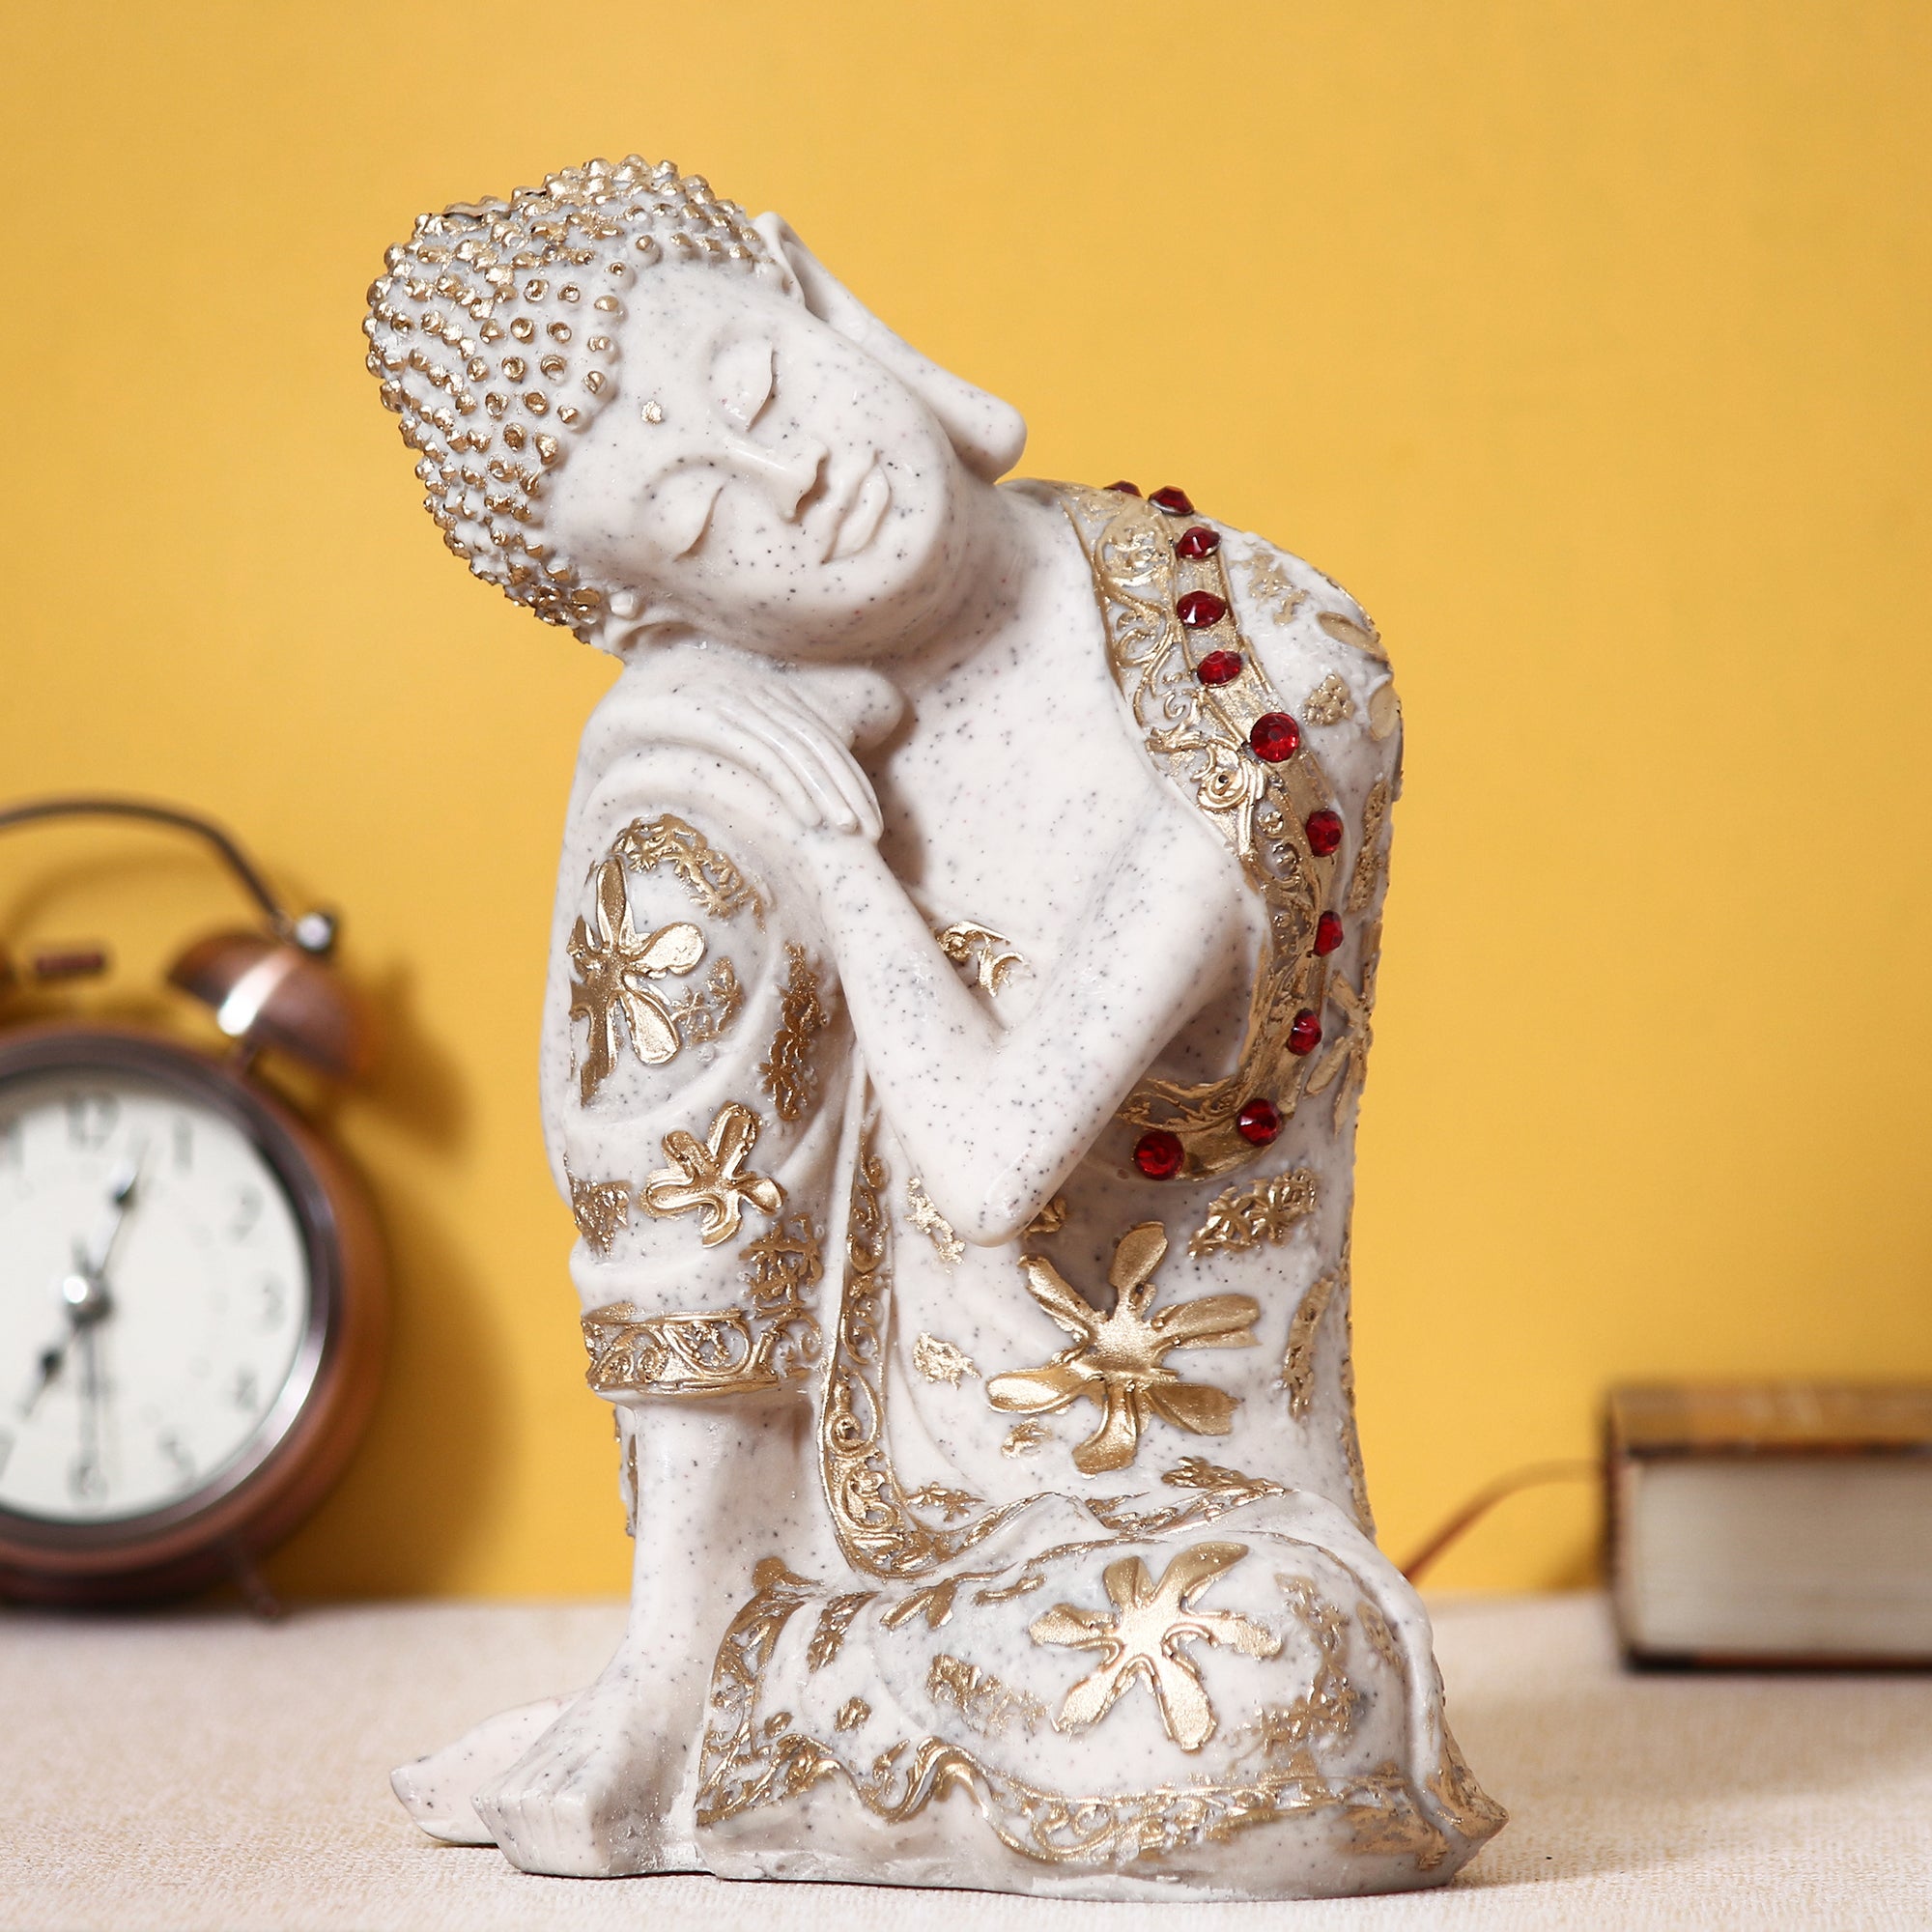 Polyresin White and Golden Resting Buddha on Knee Statue